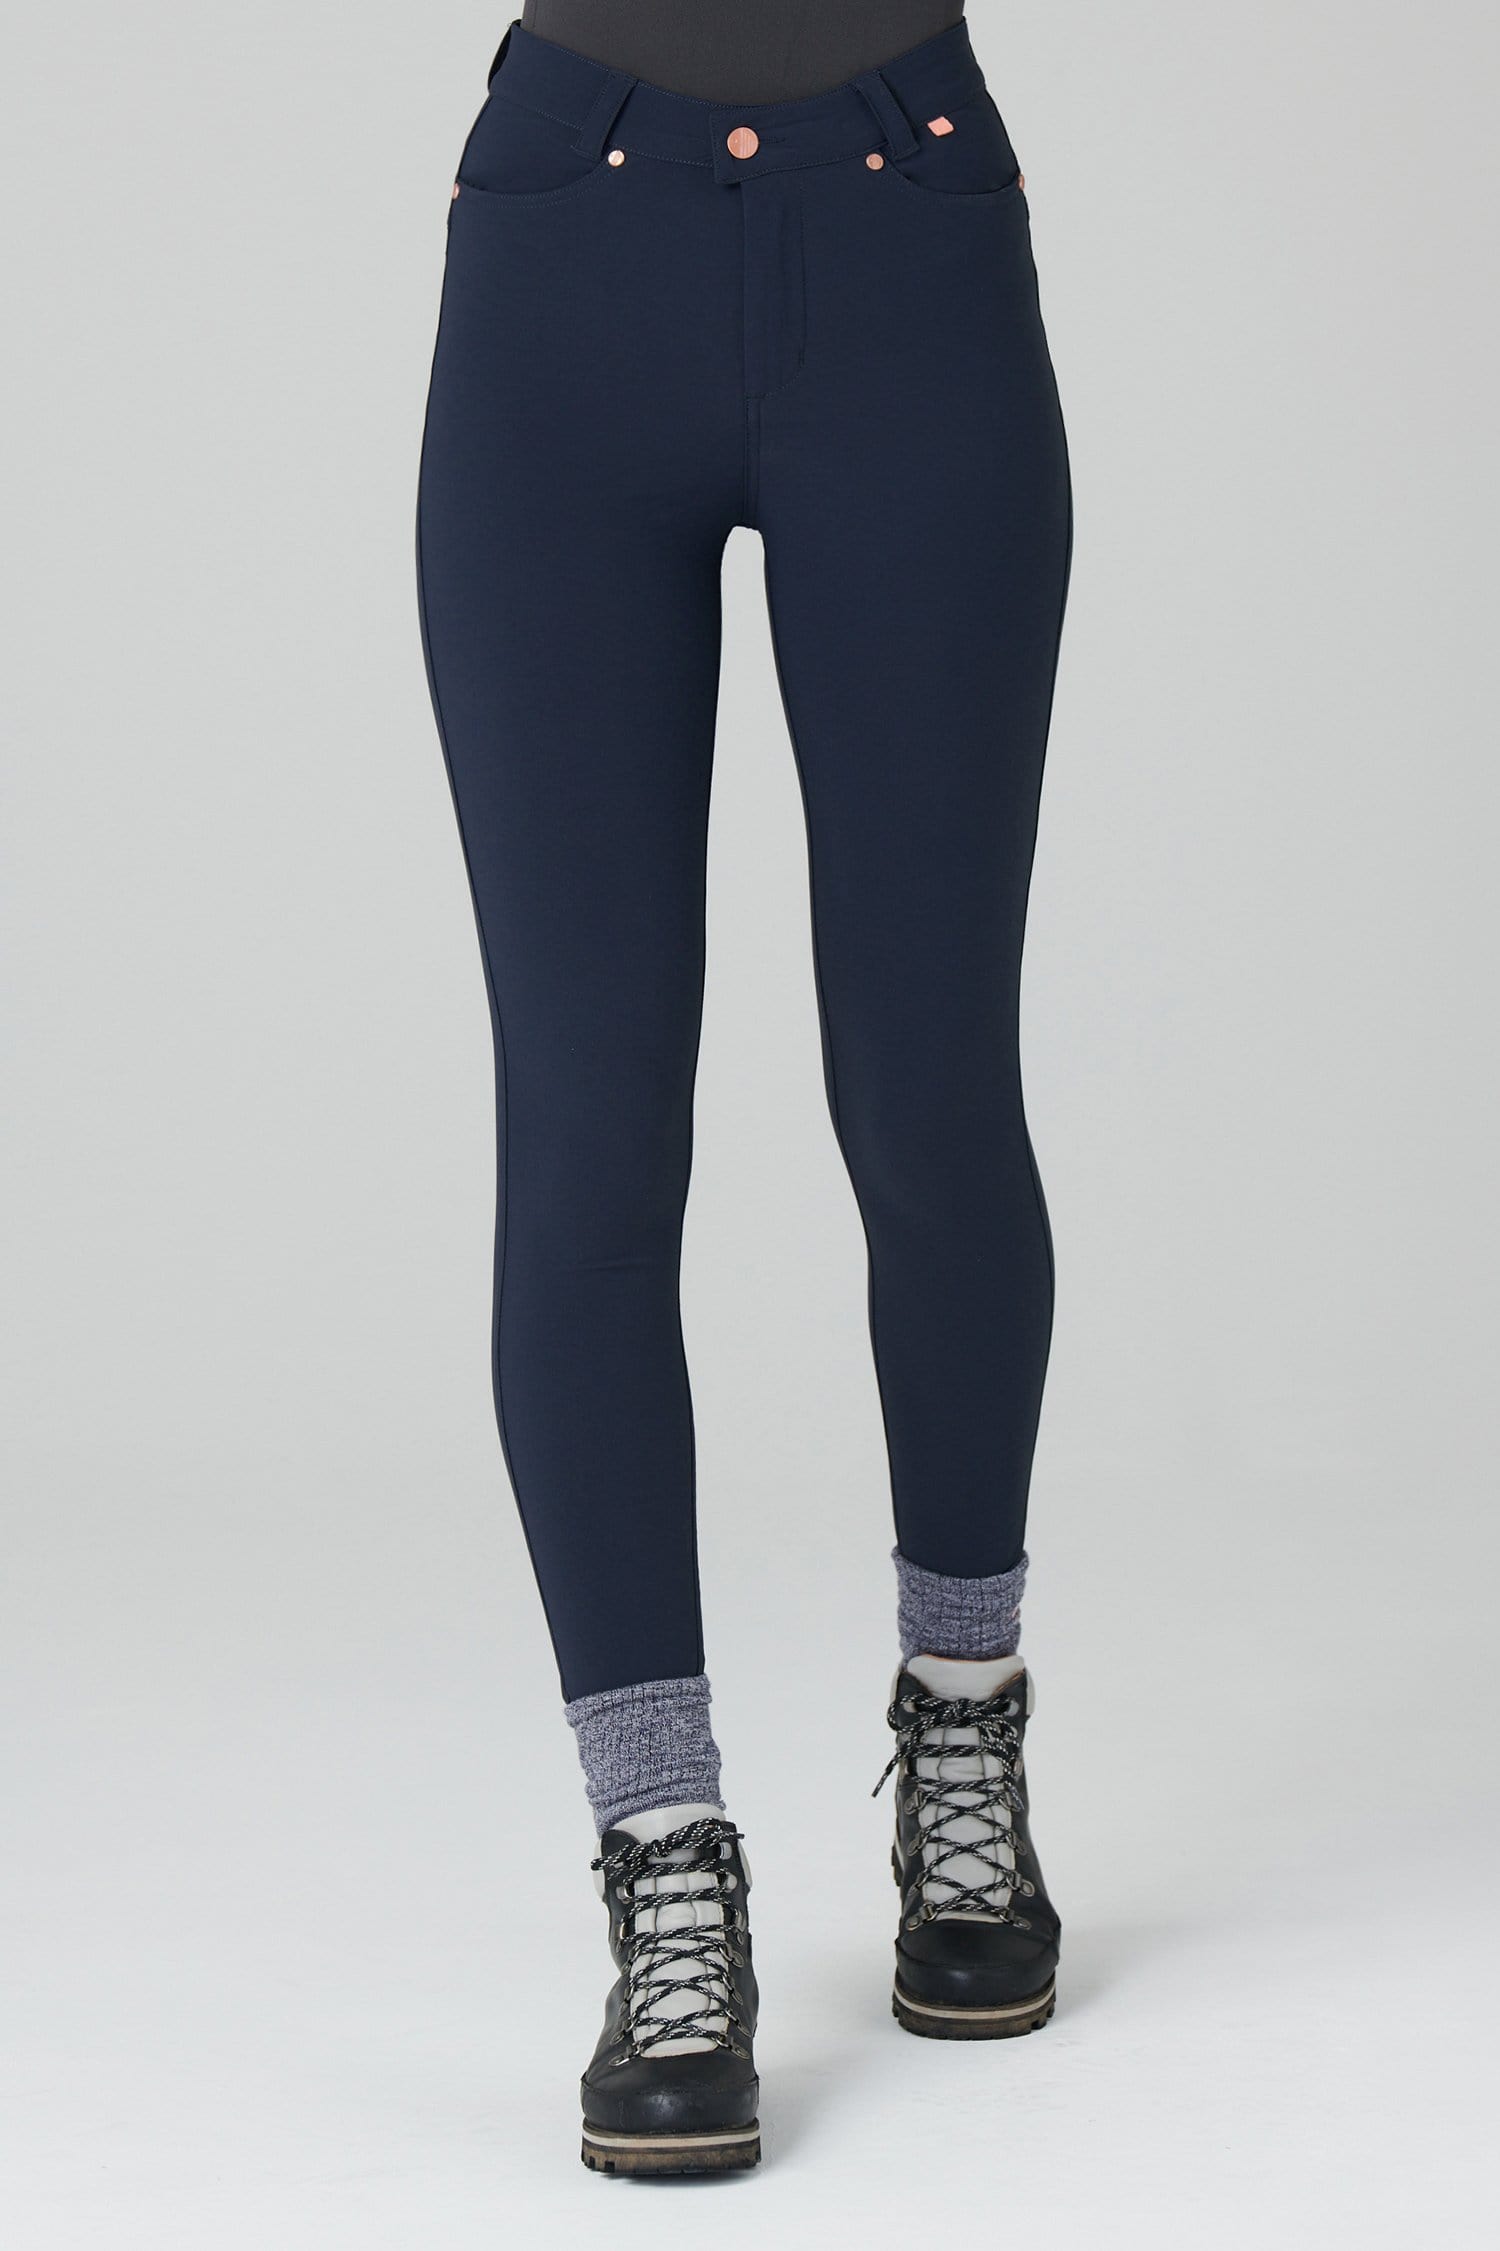 Thermal Skinny Outdoor Trousers - Deep Navy - 34r / Uk16 - Womens - Acai Outdoorwear